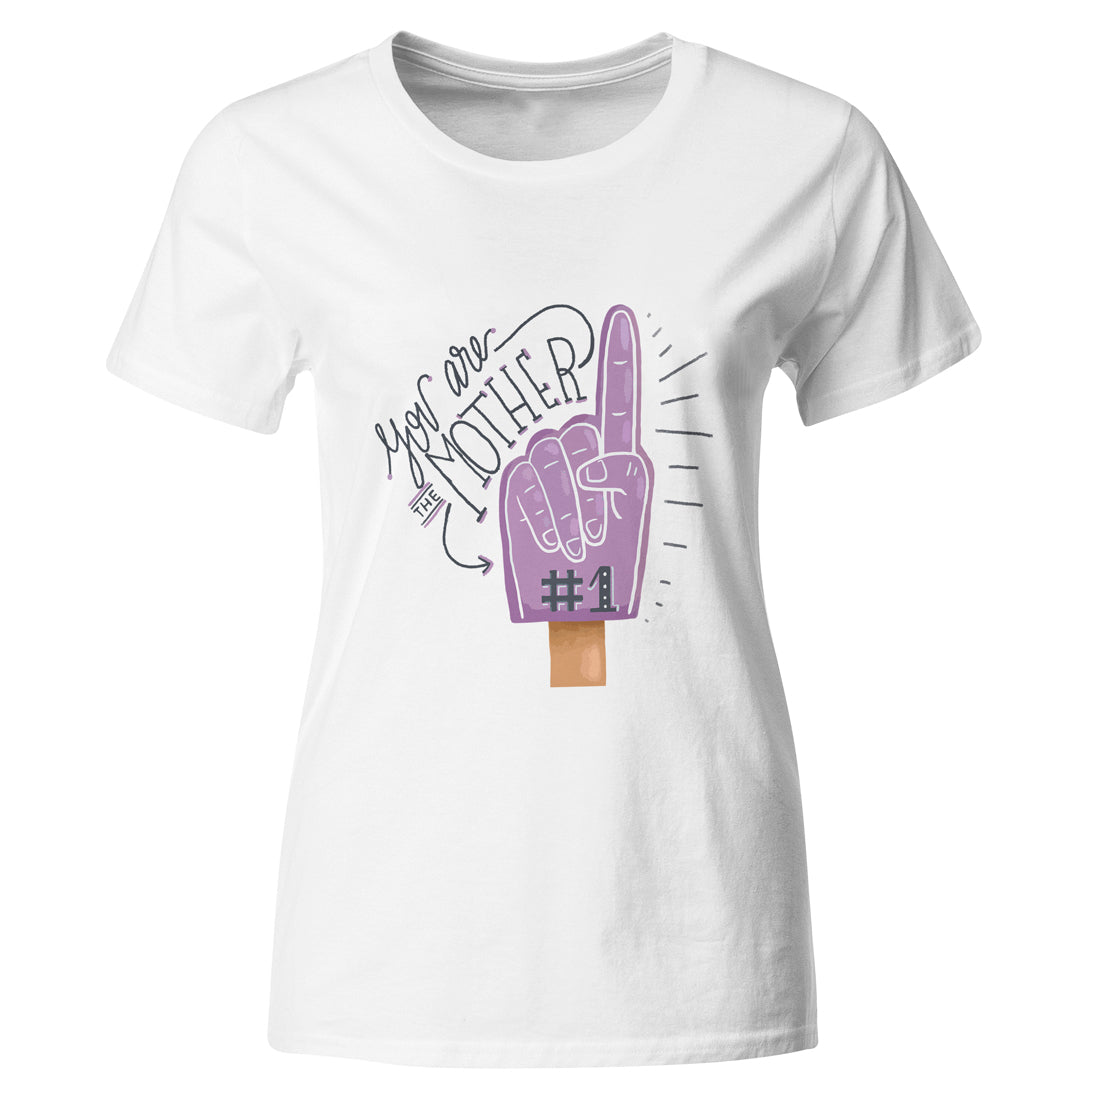 iberry's Mother's day T shirt for Women |Mother day celebration | Half Sleeve Round Neck T Shirt | Happy Mother's day Tshirts- (01)